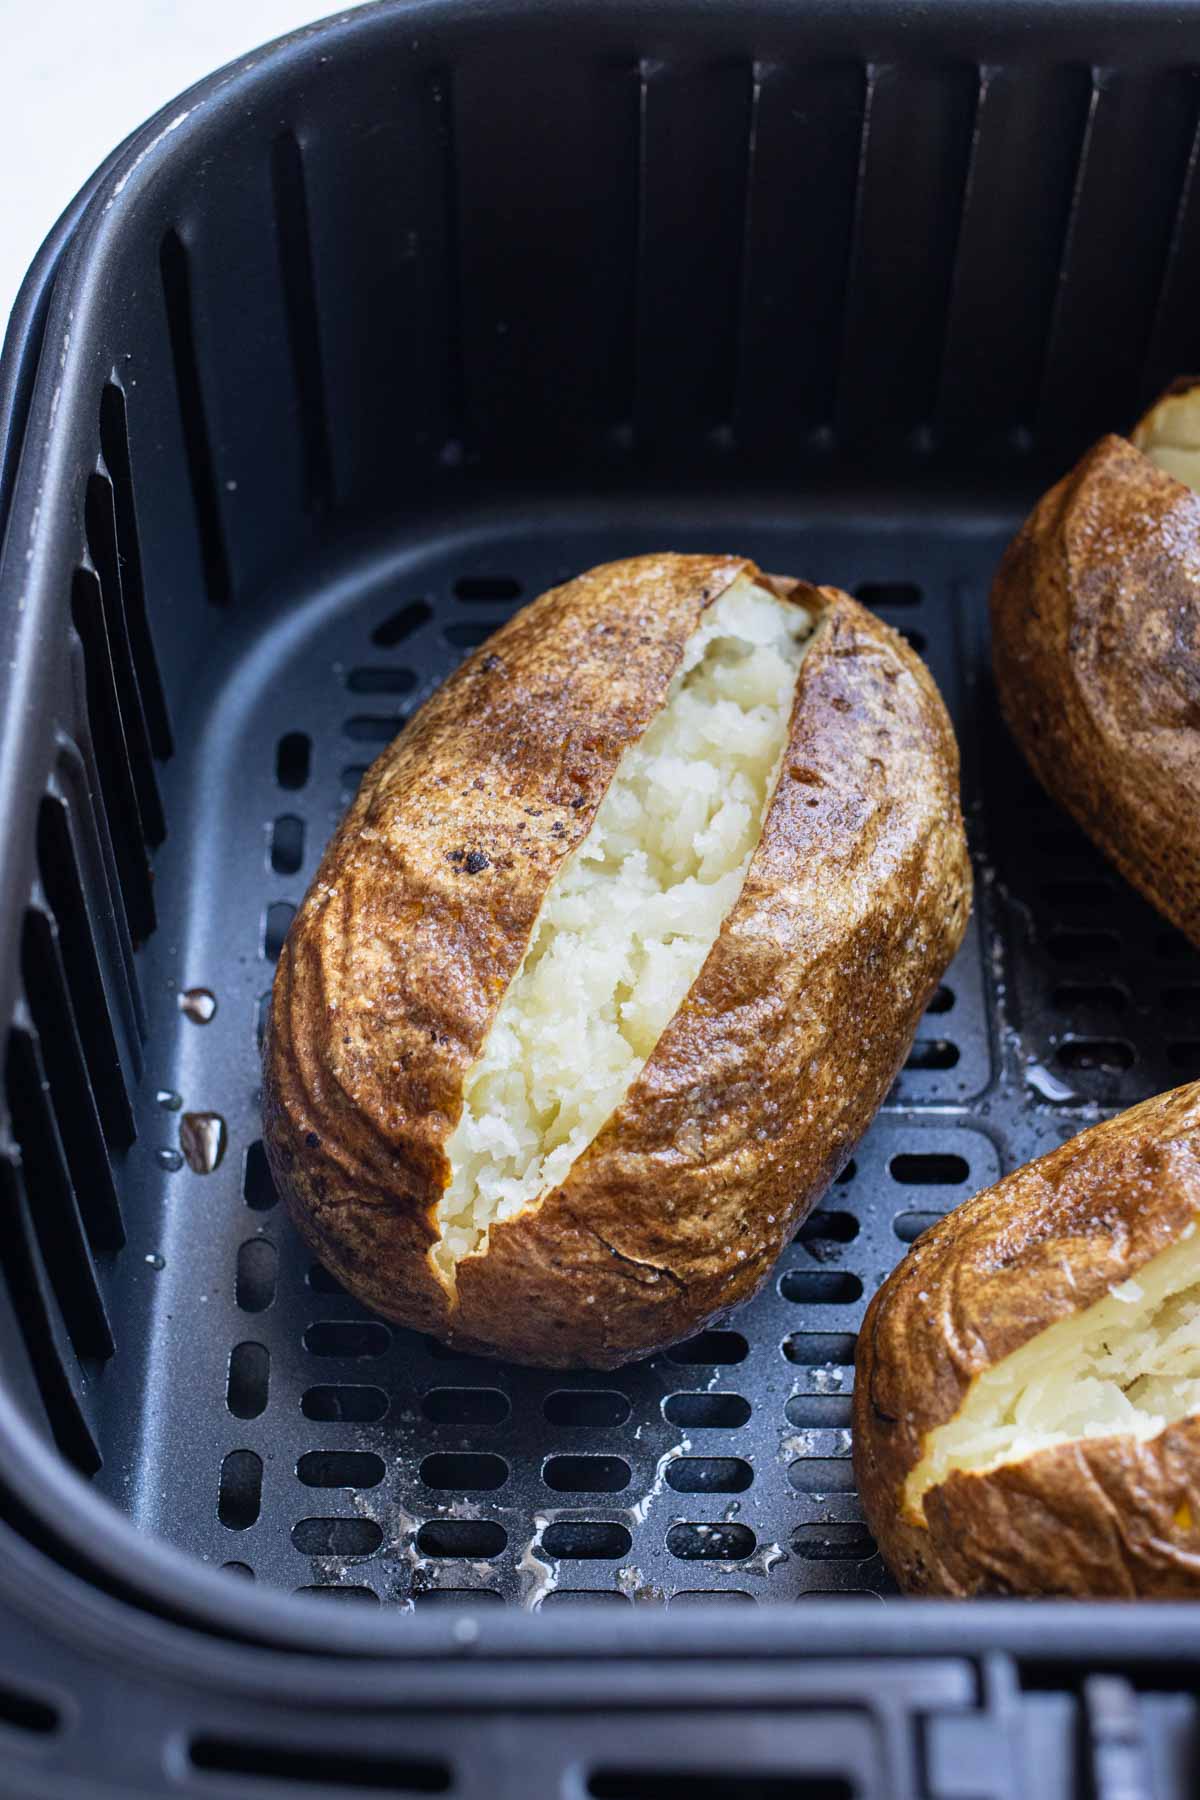 Air fryer baked potatoes are quick to make.